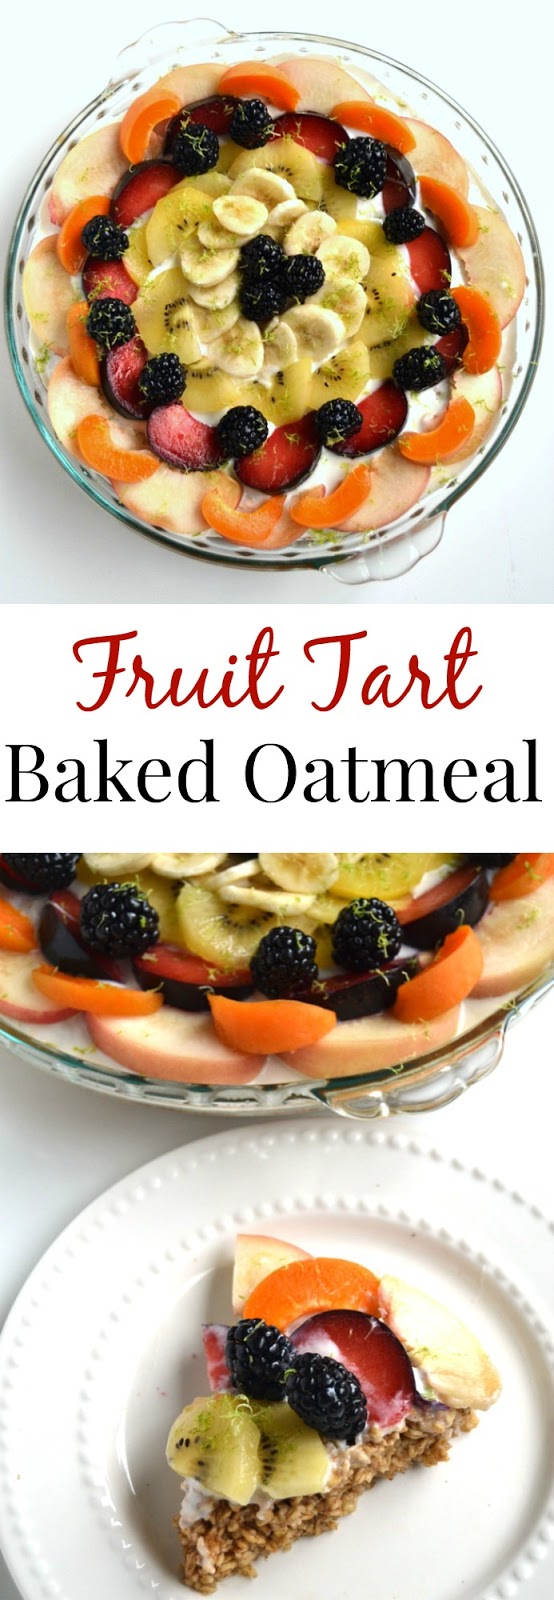 This Fruit Tart Baked Oatmeal is so easy to make, reheats well and is a healthy take on your favorite fruit tart or fruit pizza. Customize with your favorite fruit! www.nutritionistreviews.com